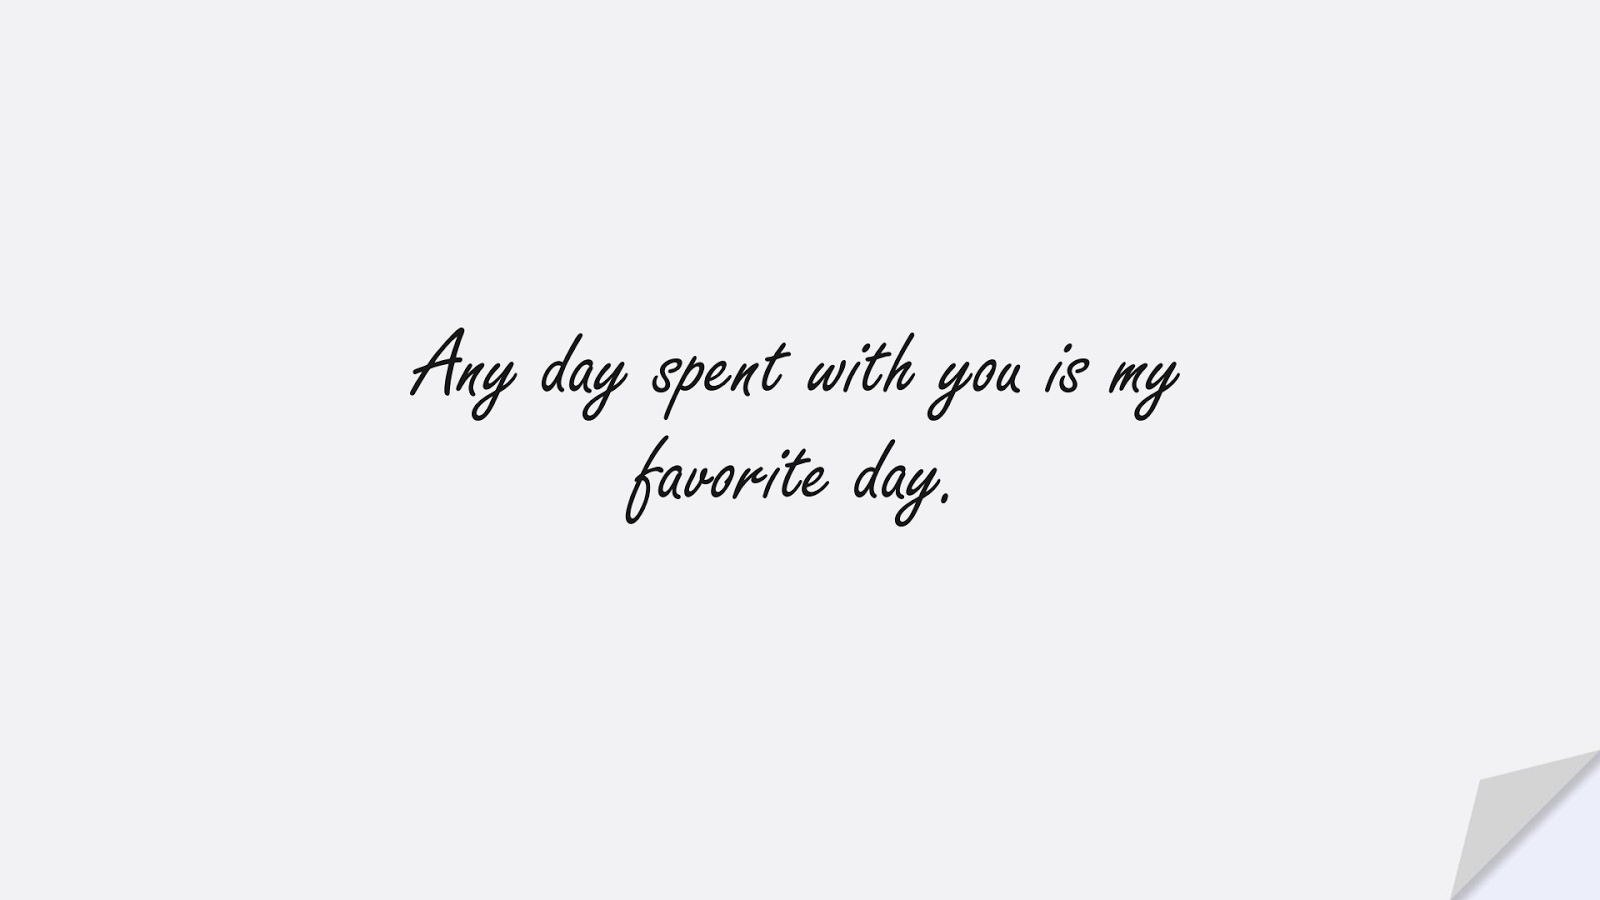 Any day spent with you is my favorite day.FALSE